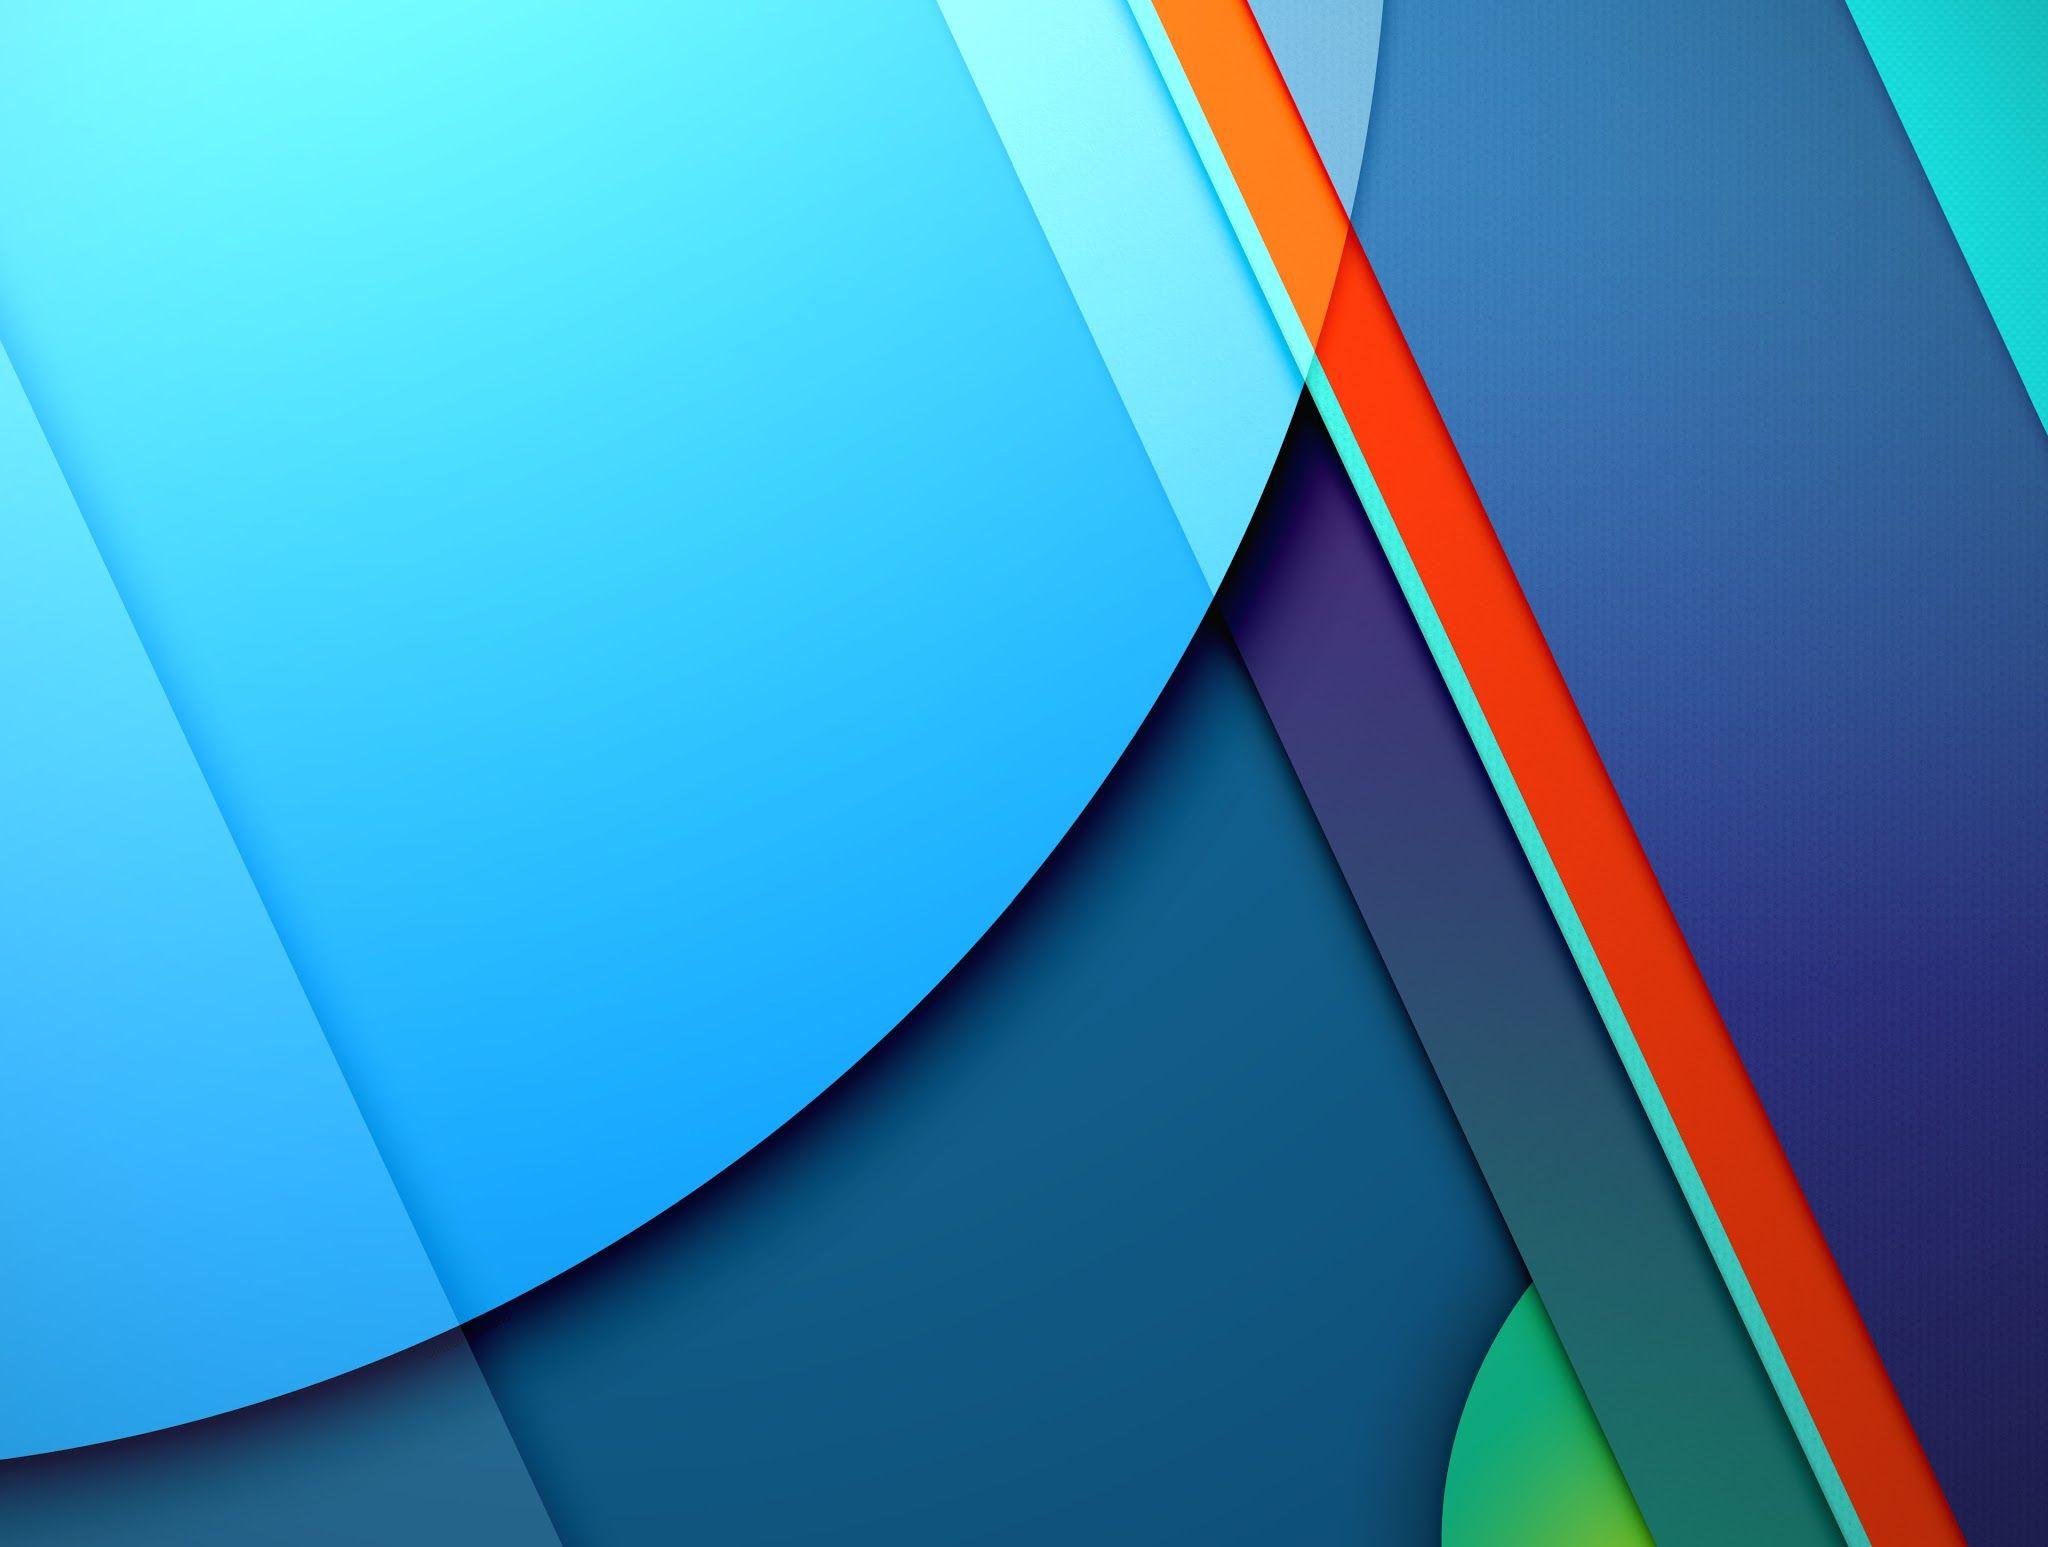 Here is a big collection of cool material design HD wallpaper